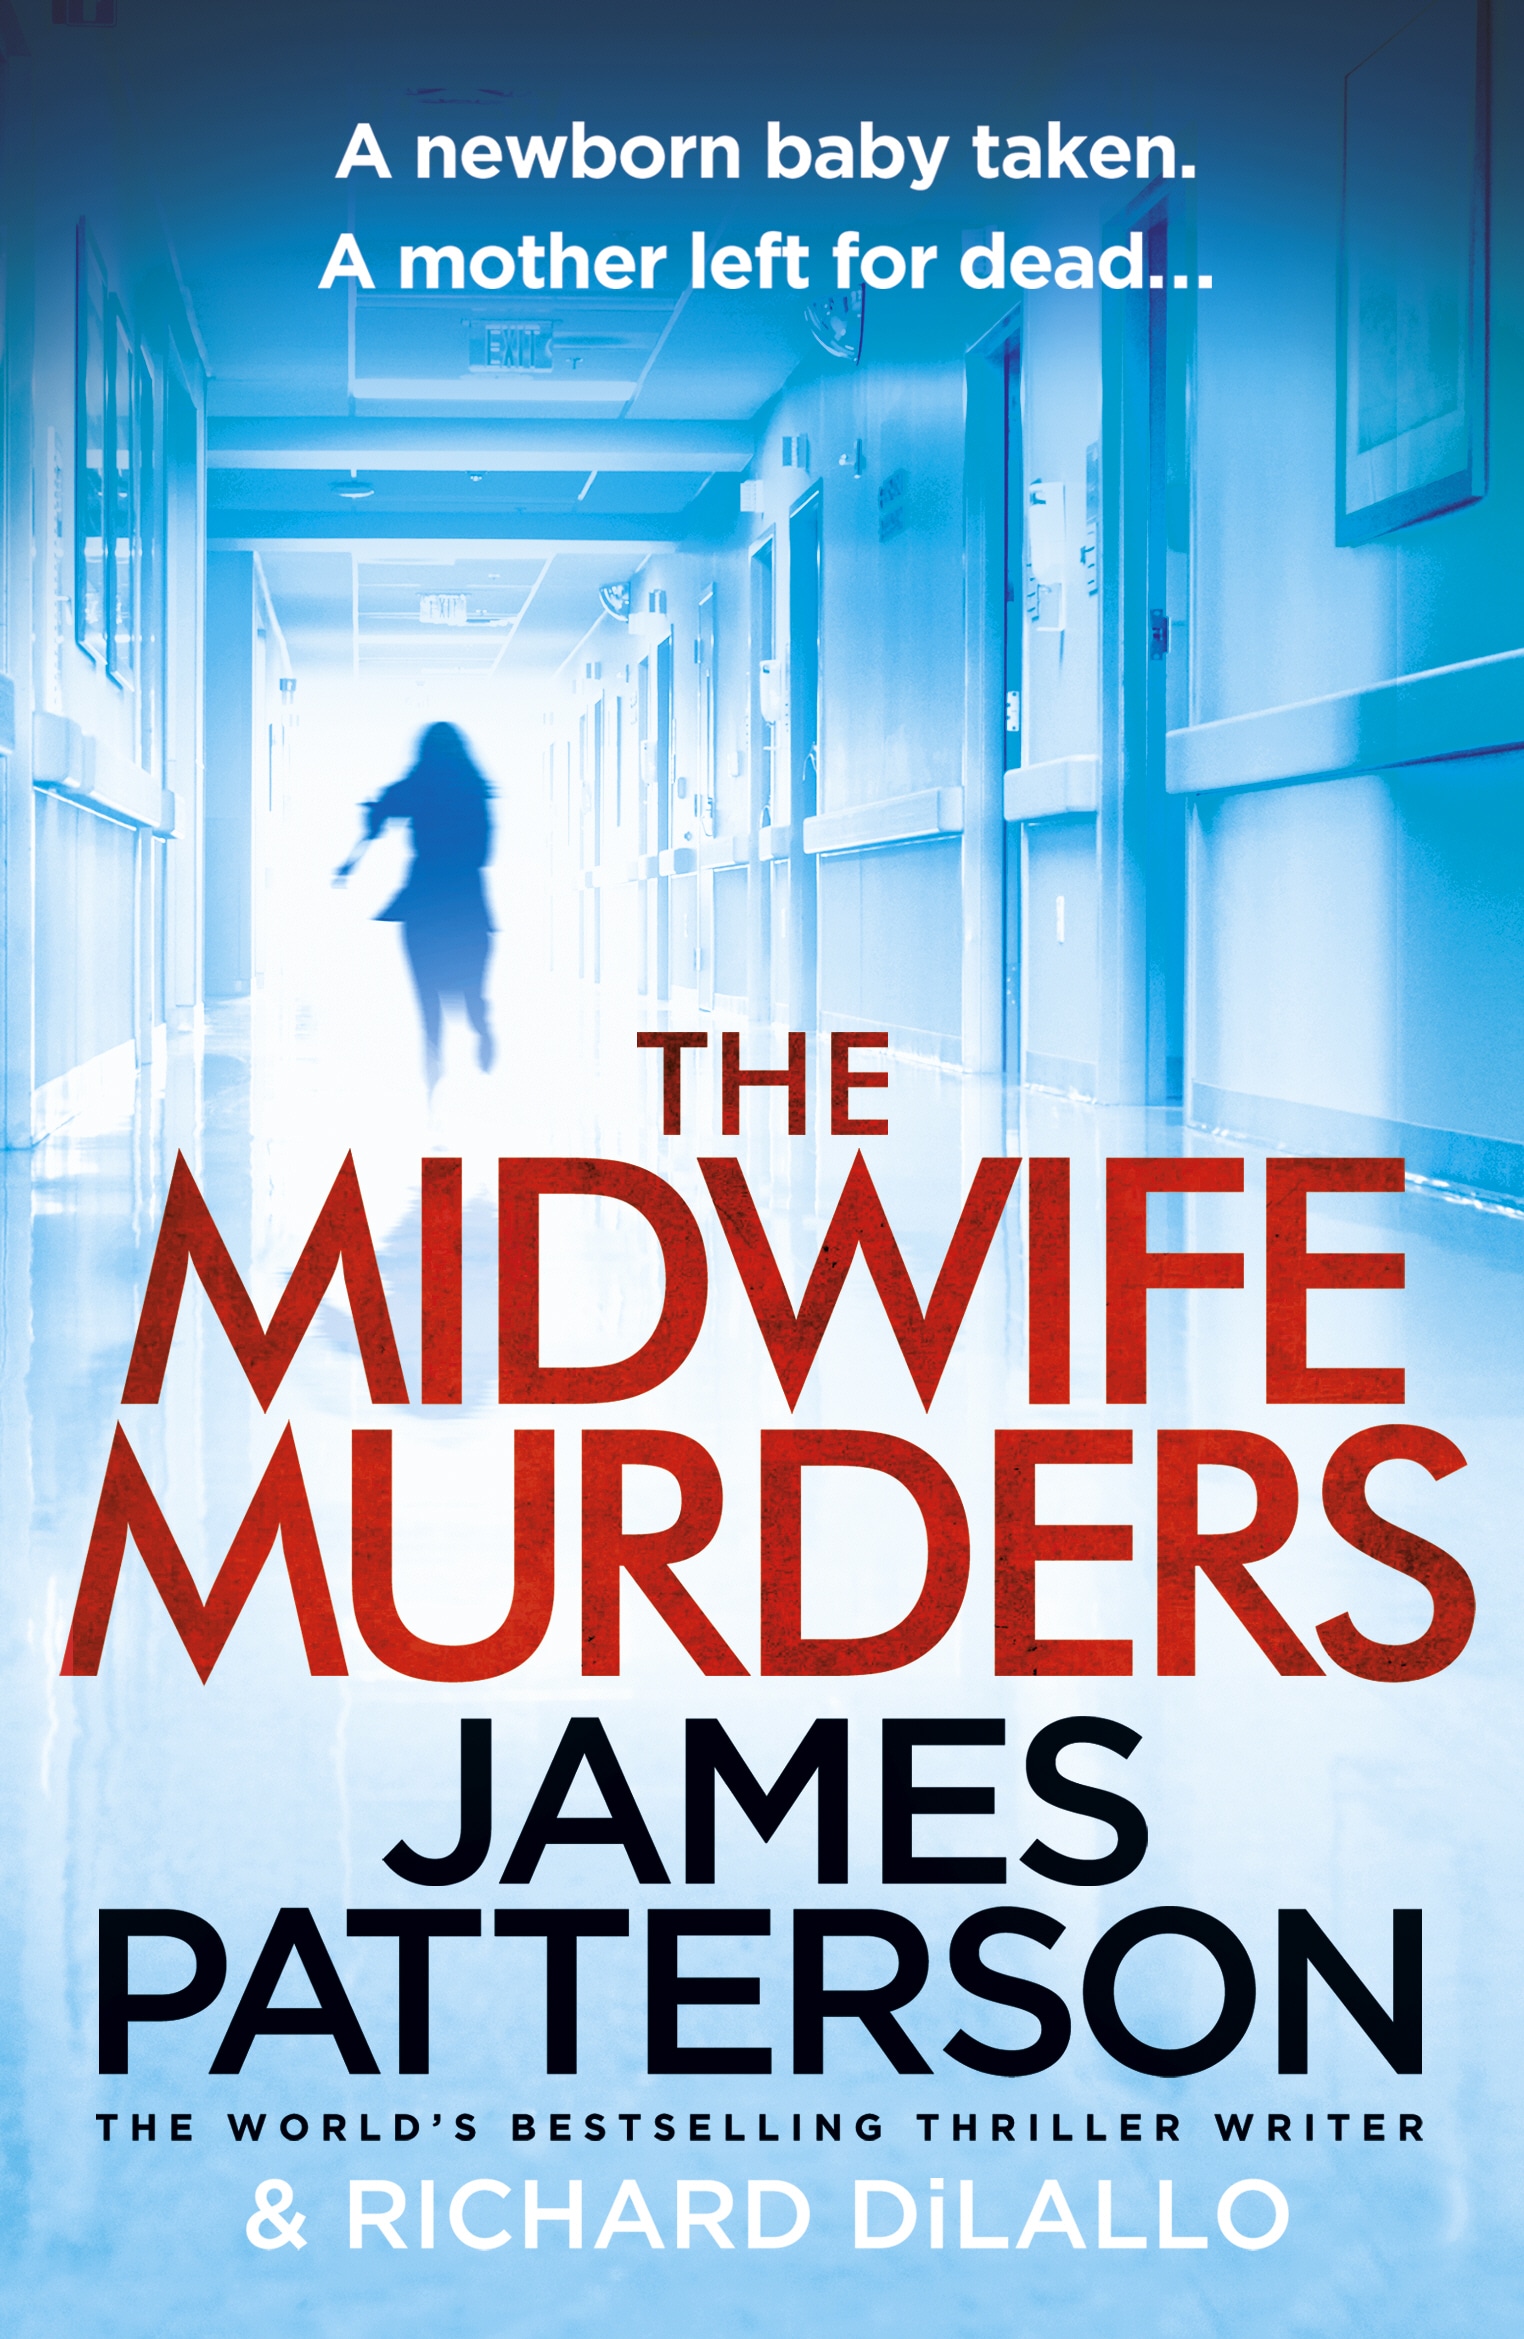 Book “The Midwife Murders” by James Patterson — August 6, 2020